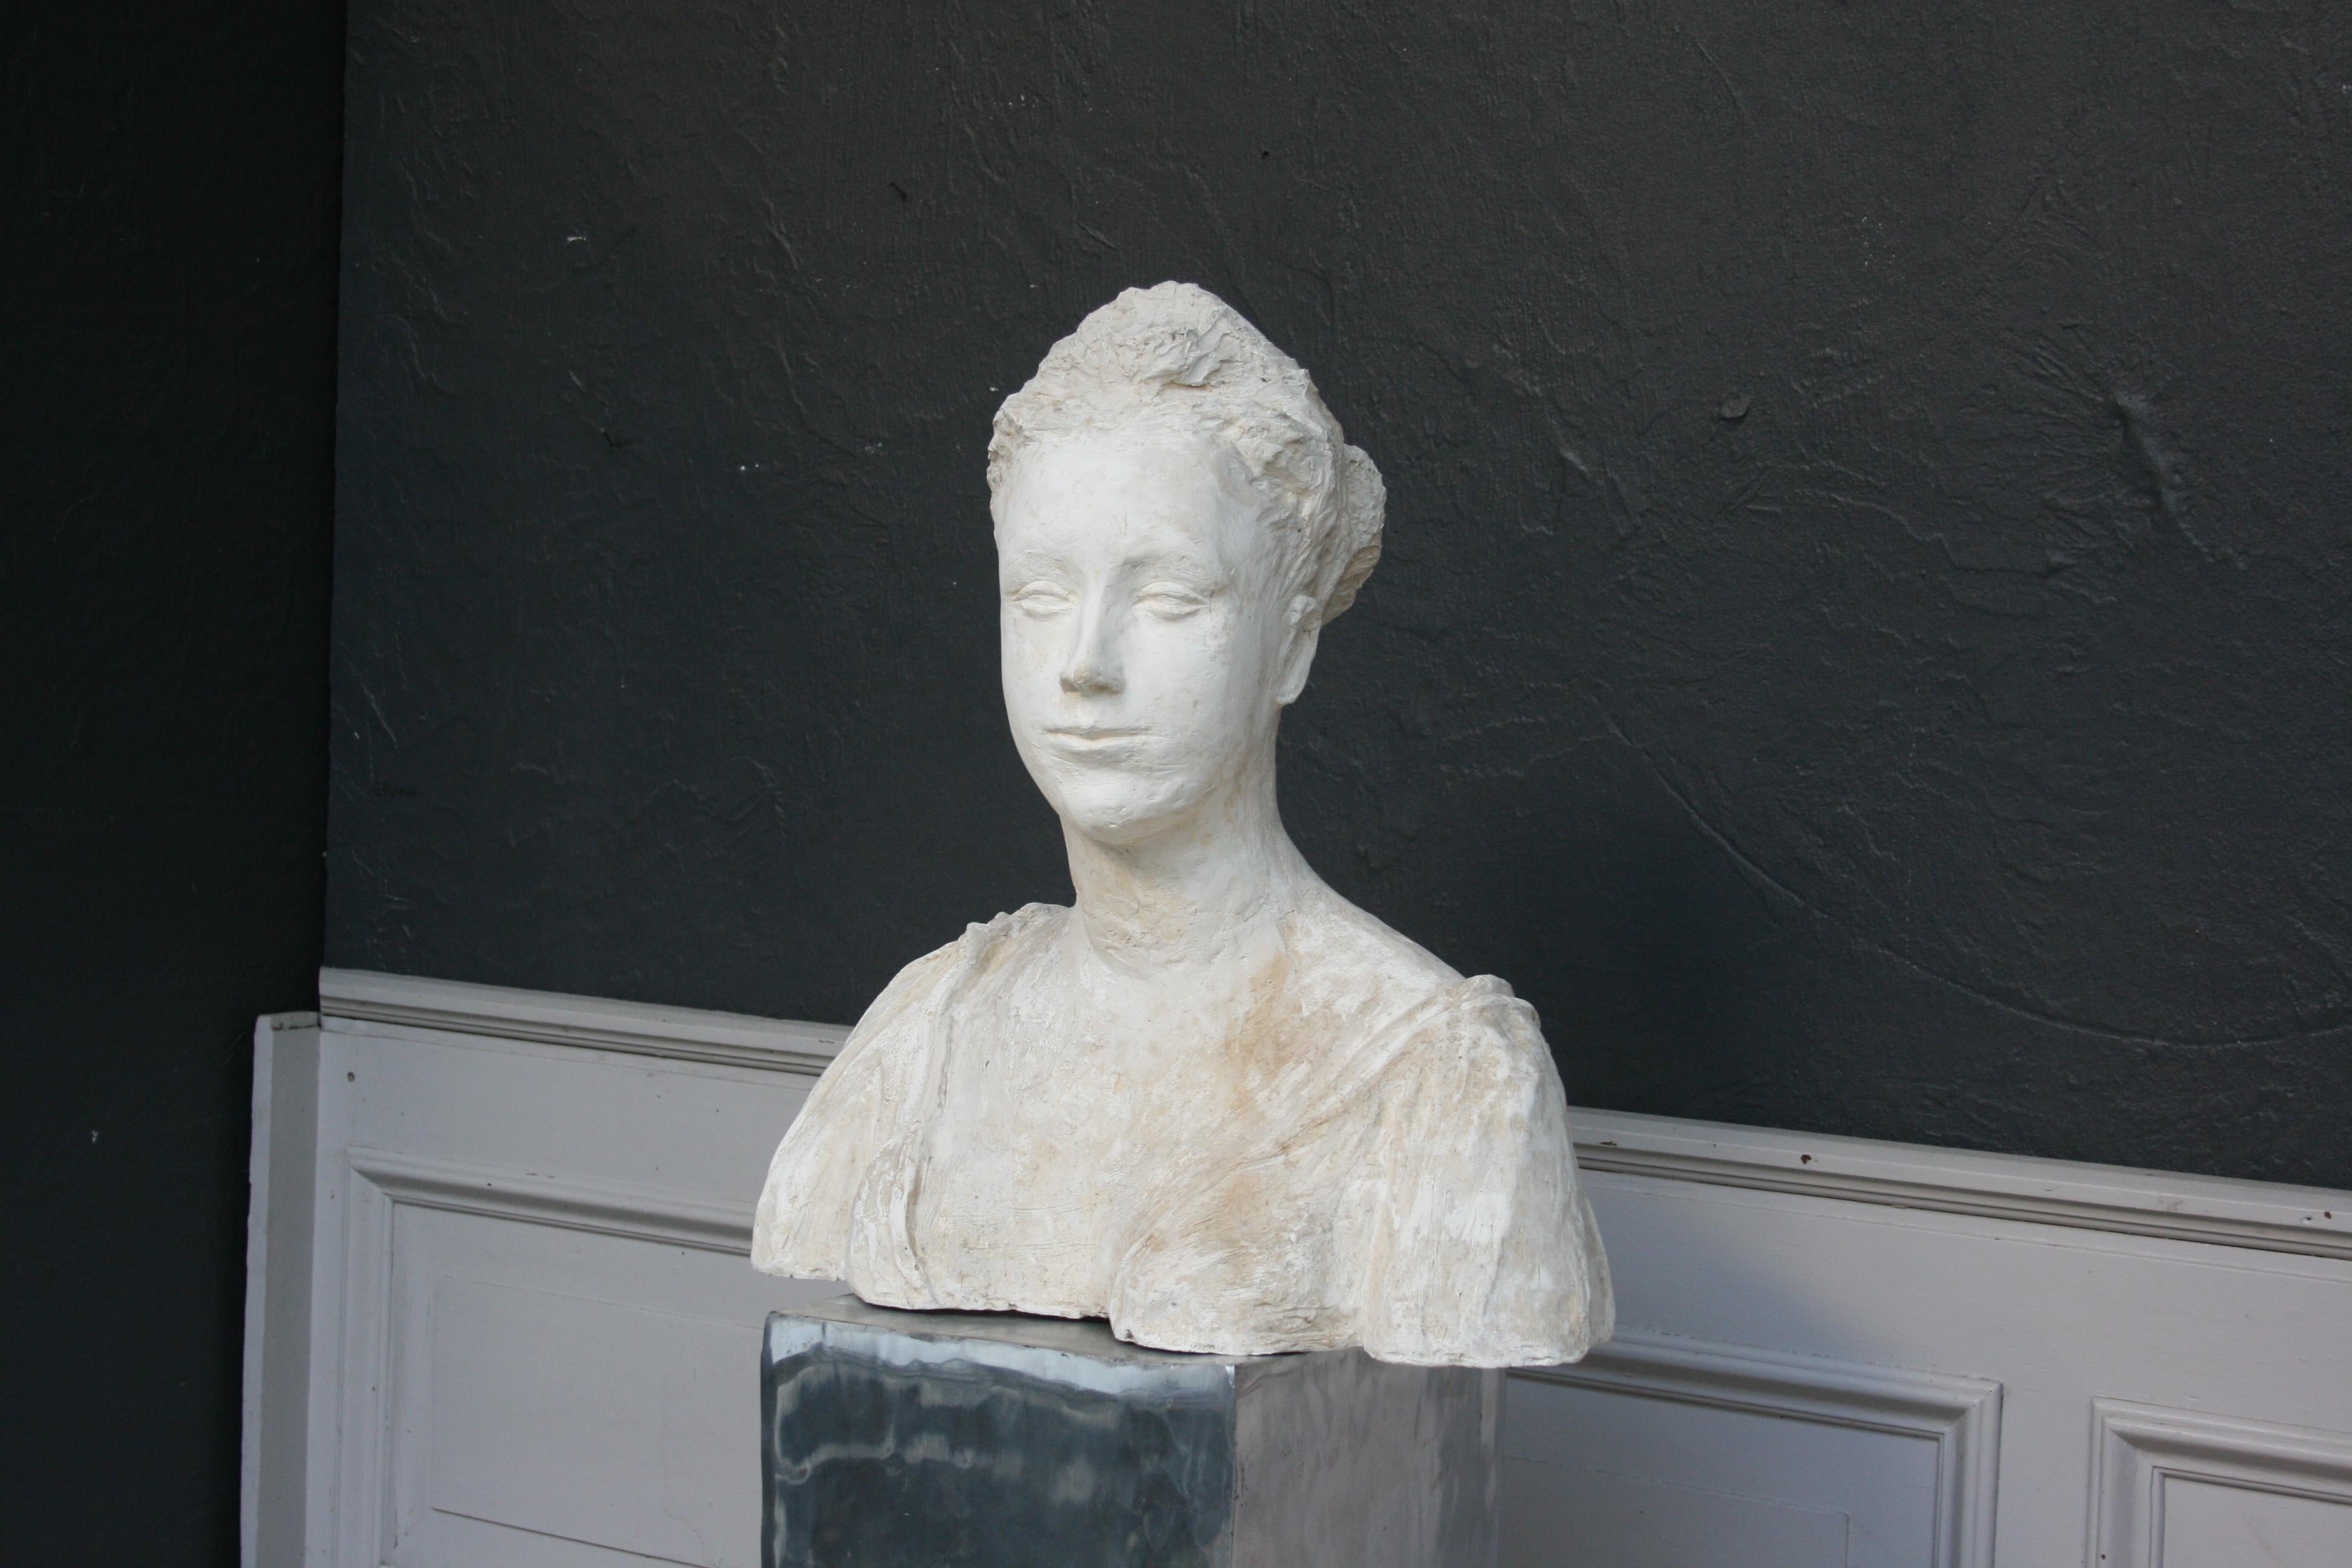 Hand-Crafted Plaster Bust of a Woman, Handsculpted, France, circa 1930